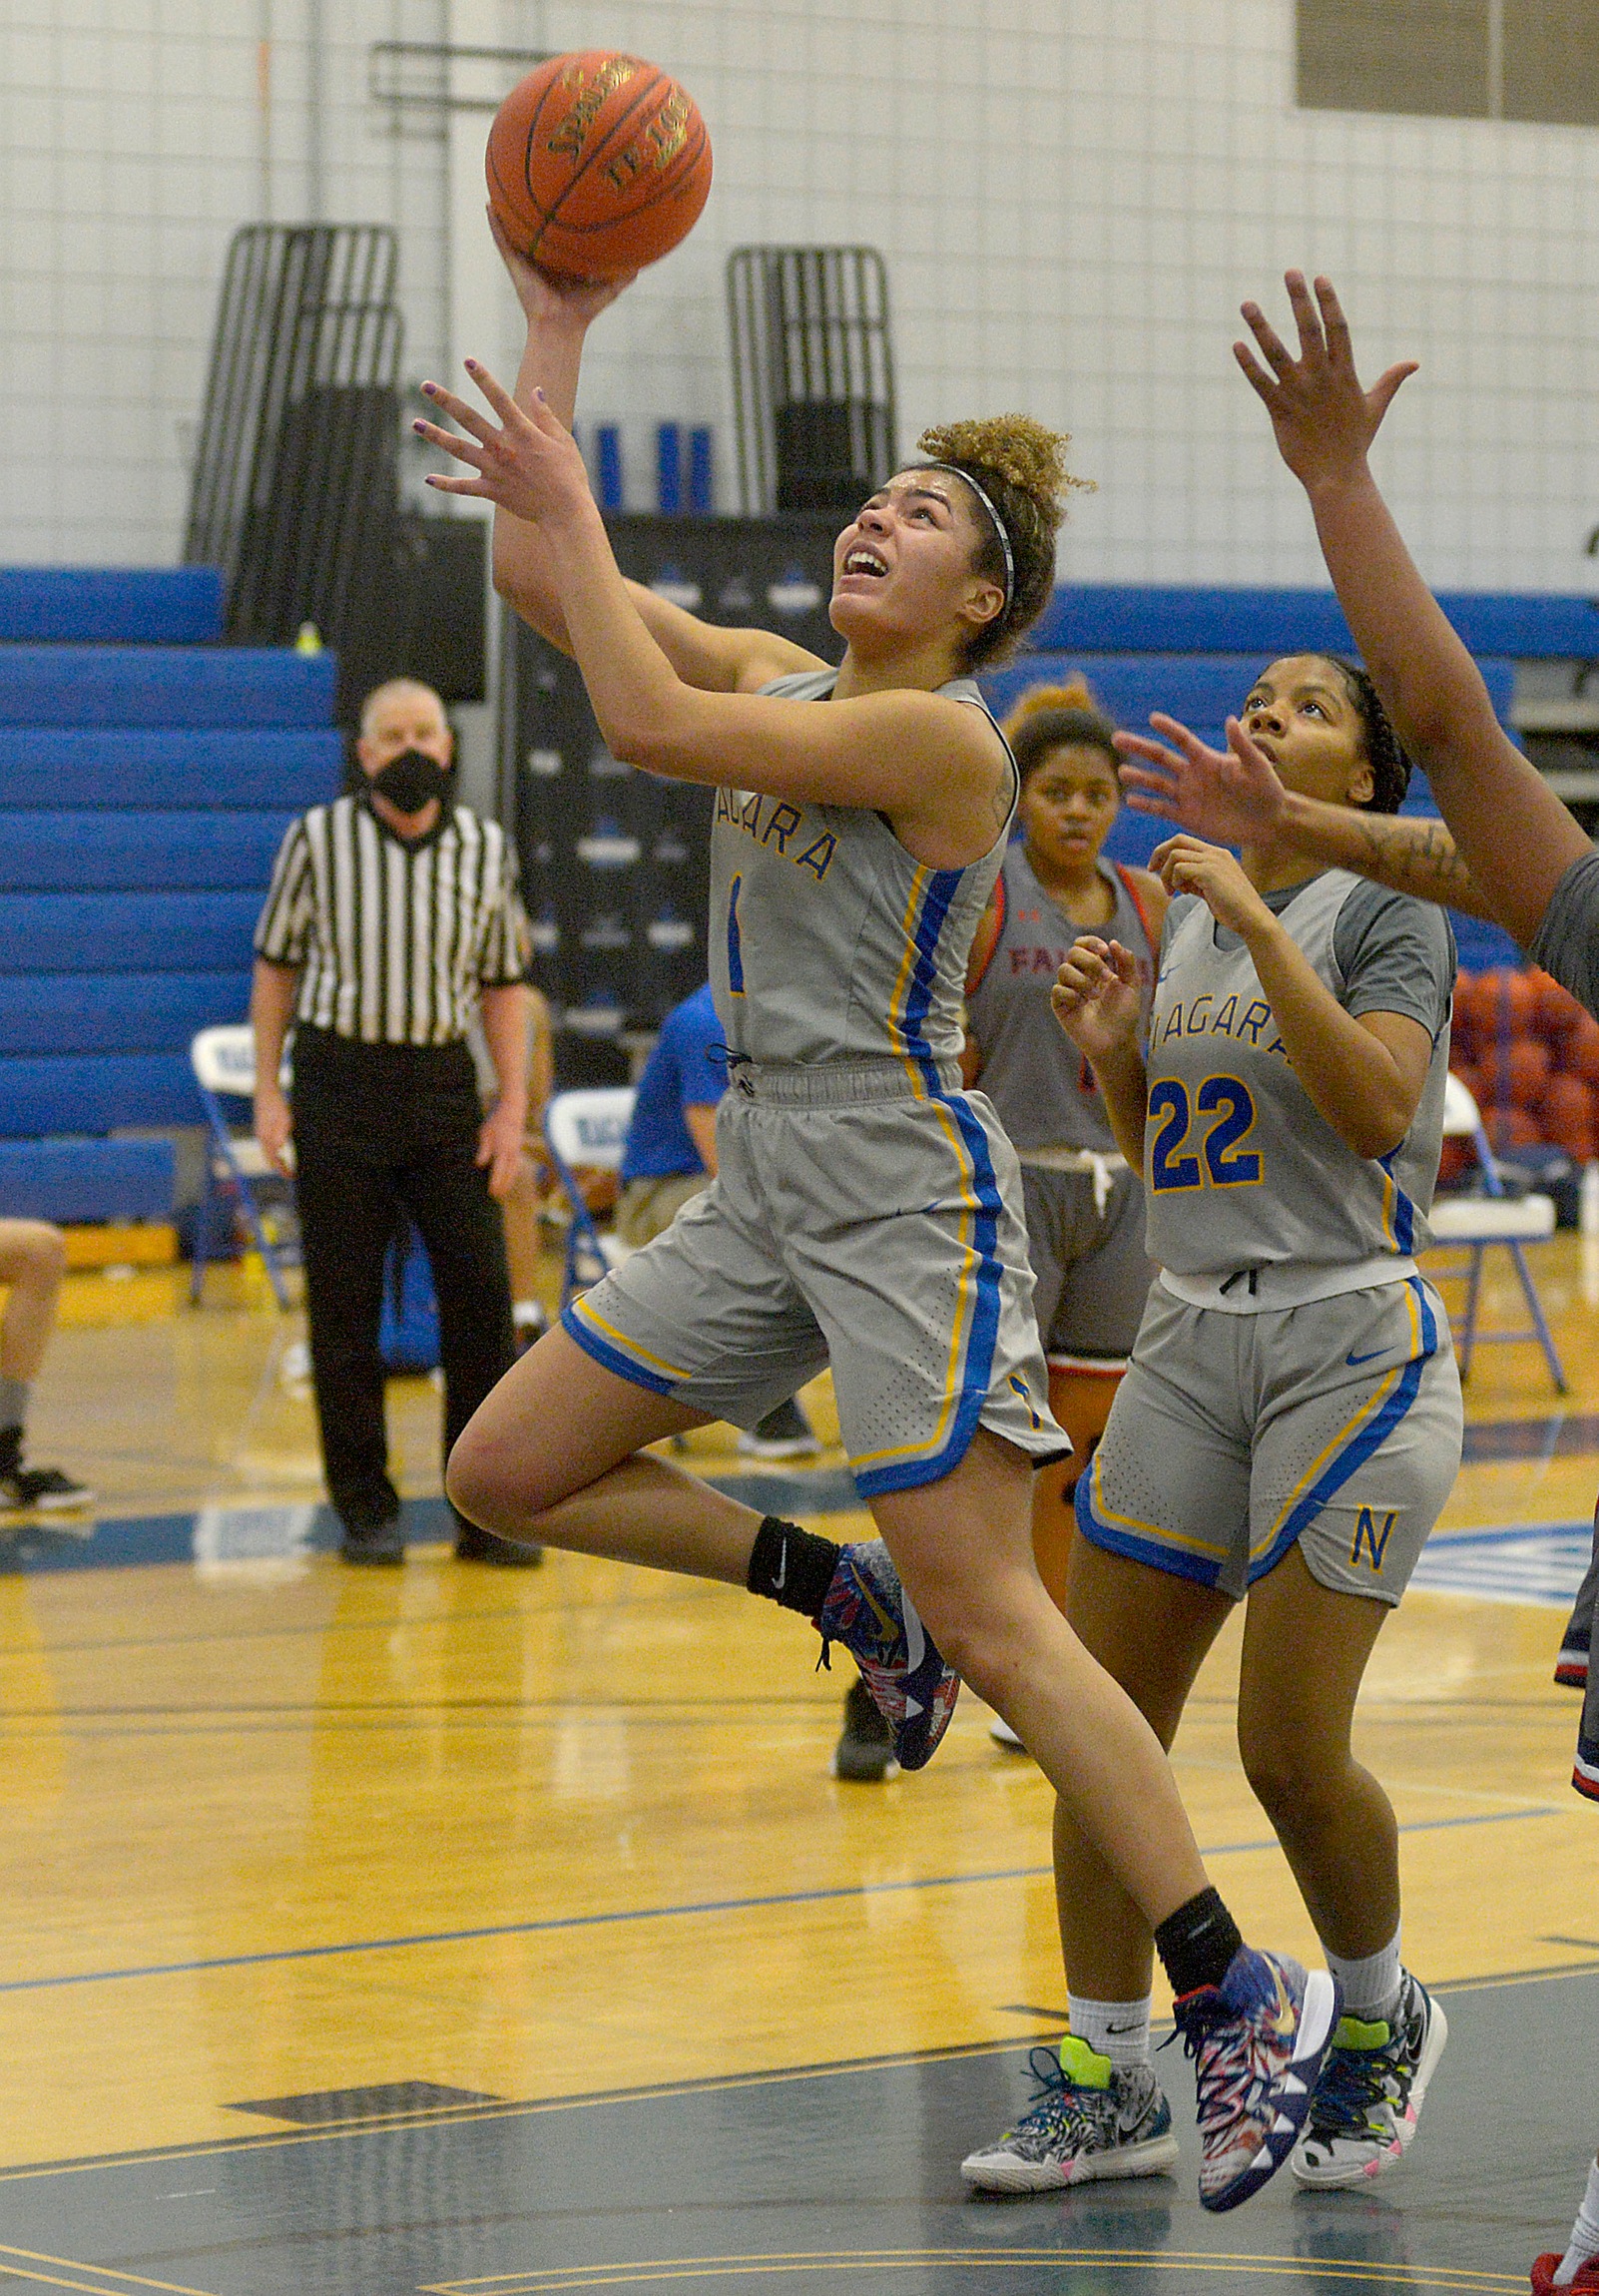 NCCC earns first victory of year